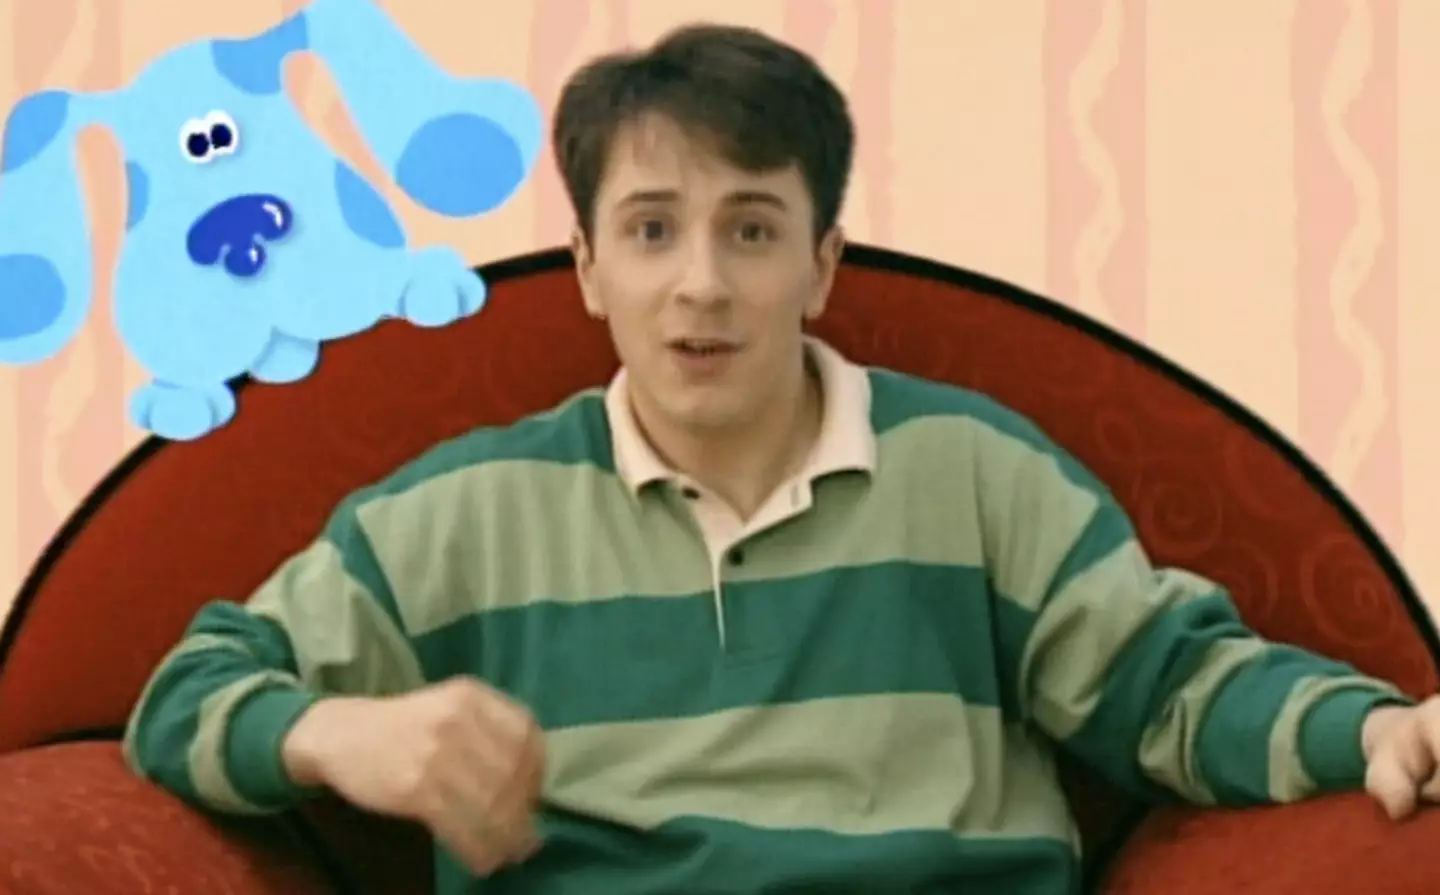 Steve Burns was on Blue's Clues for six years.